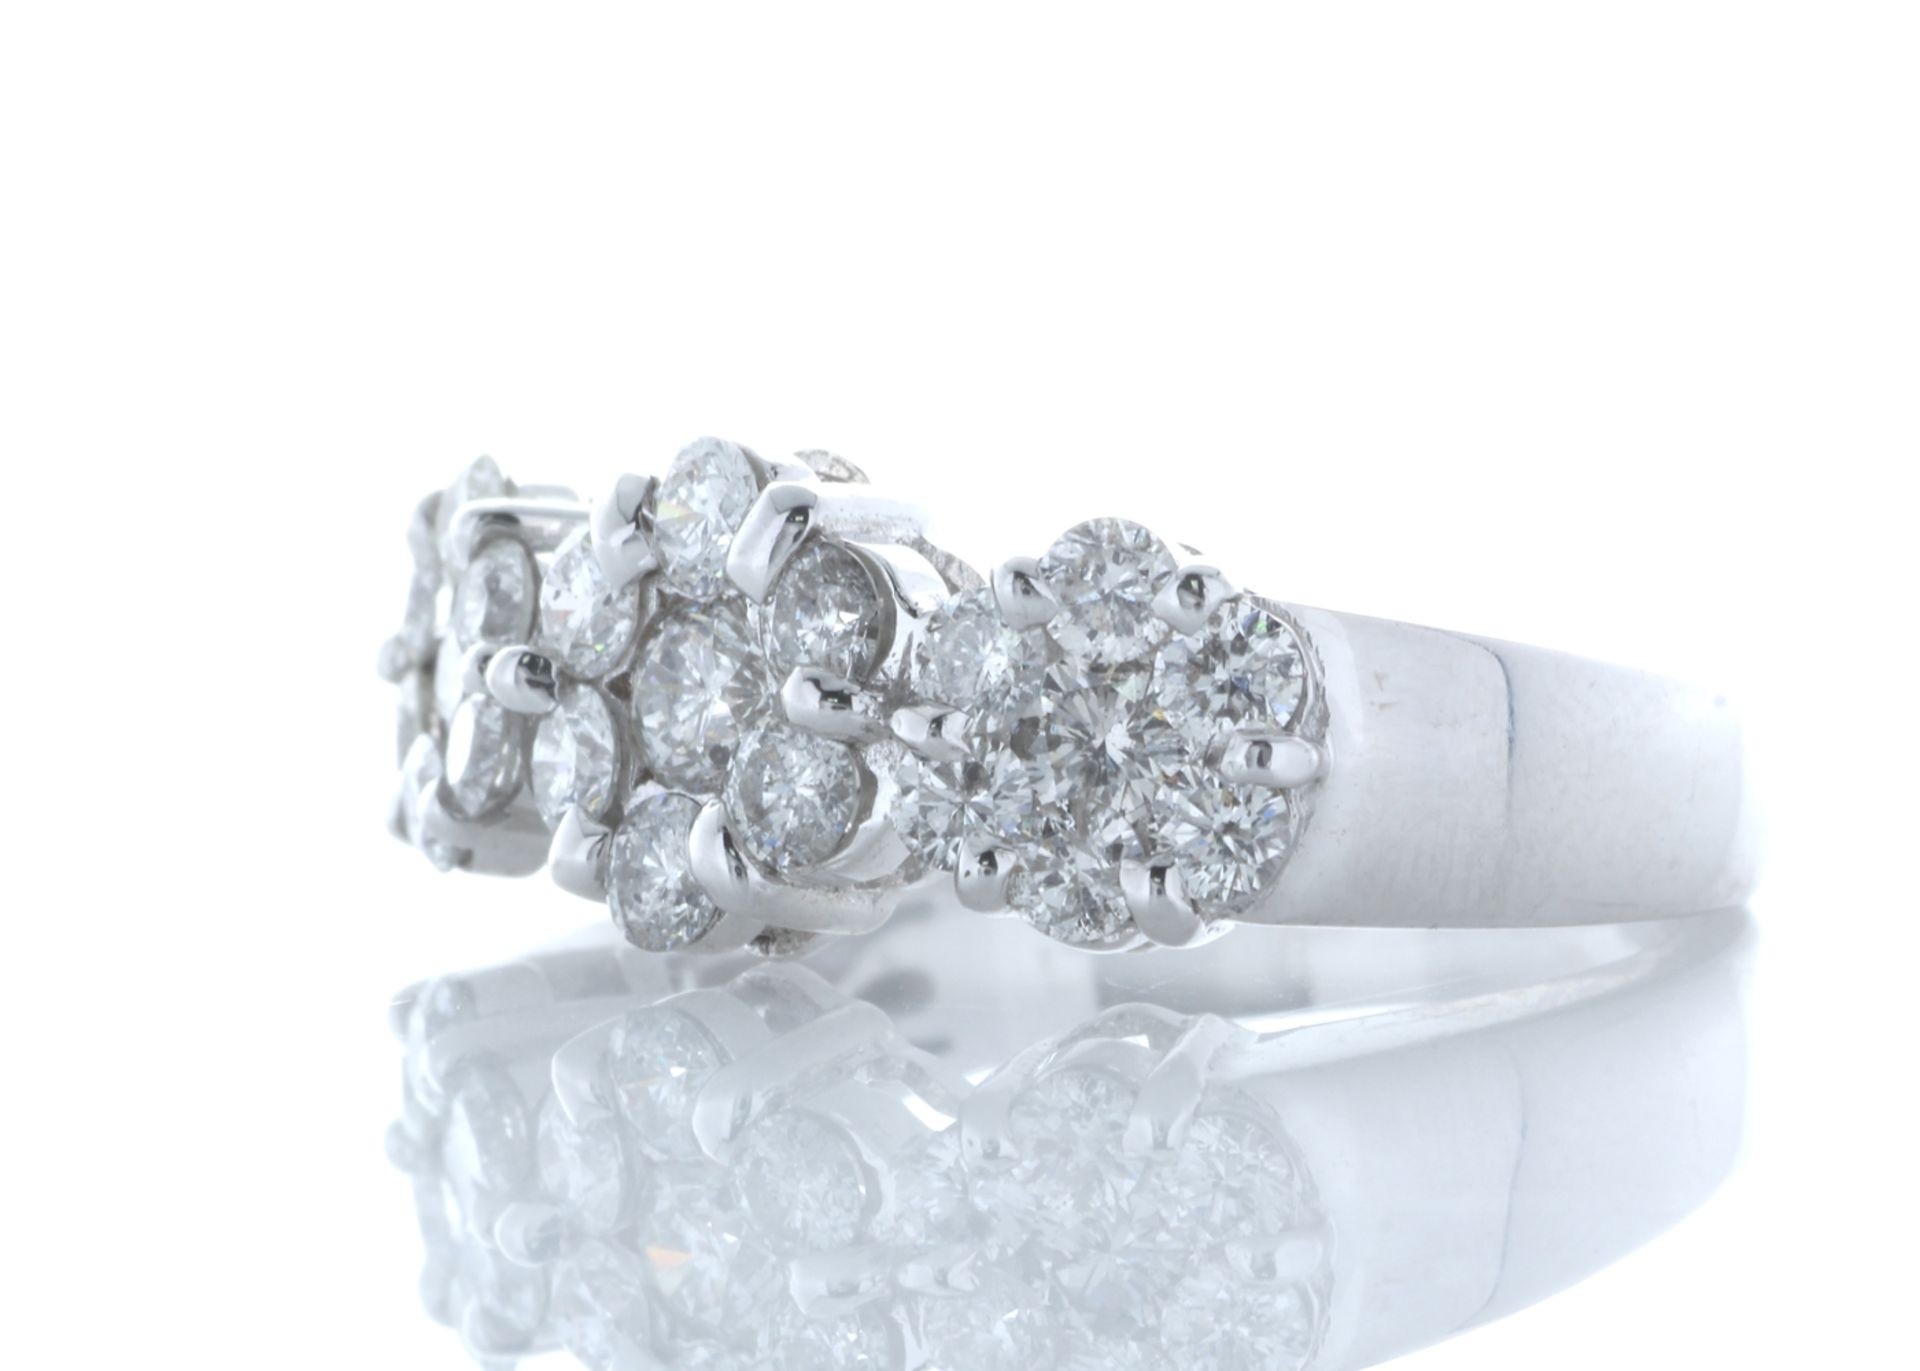 18ct White Gold Flower Cluster Diamond Ring 1.50 Carats - Valued by IDI £7,275.00 - Twenty one - Image 2 of 5